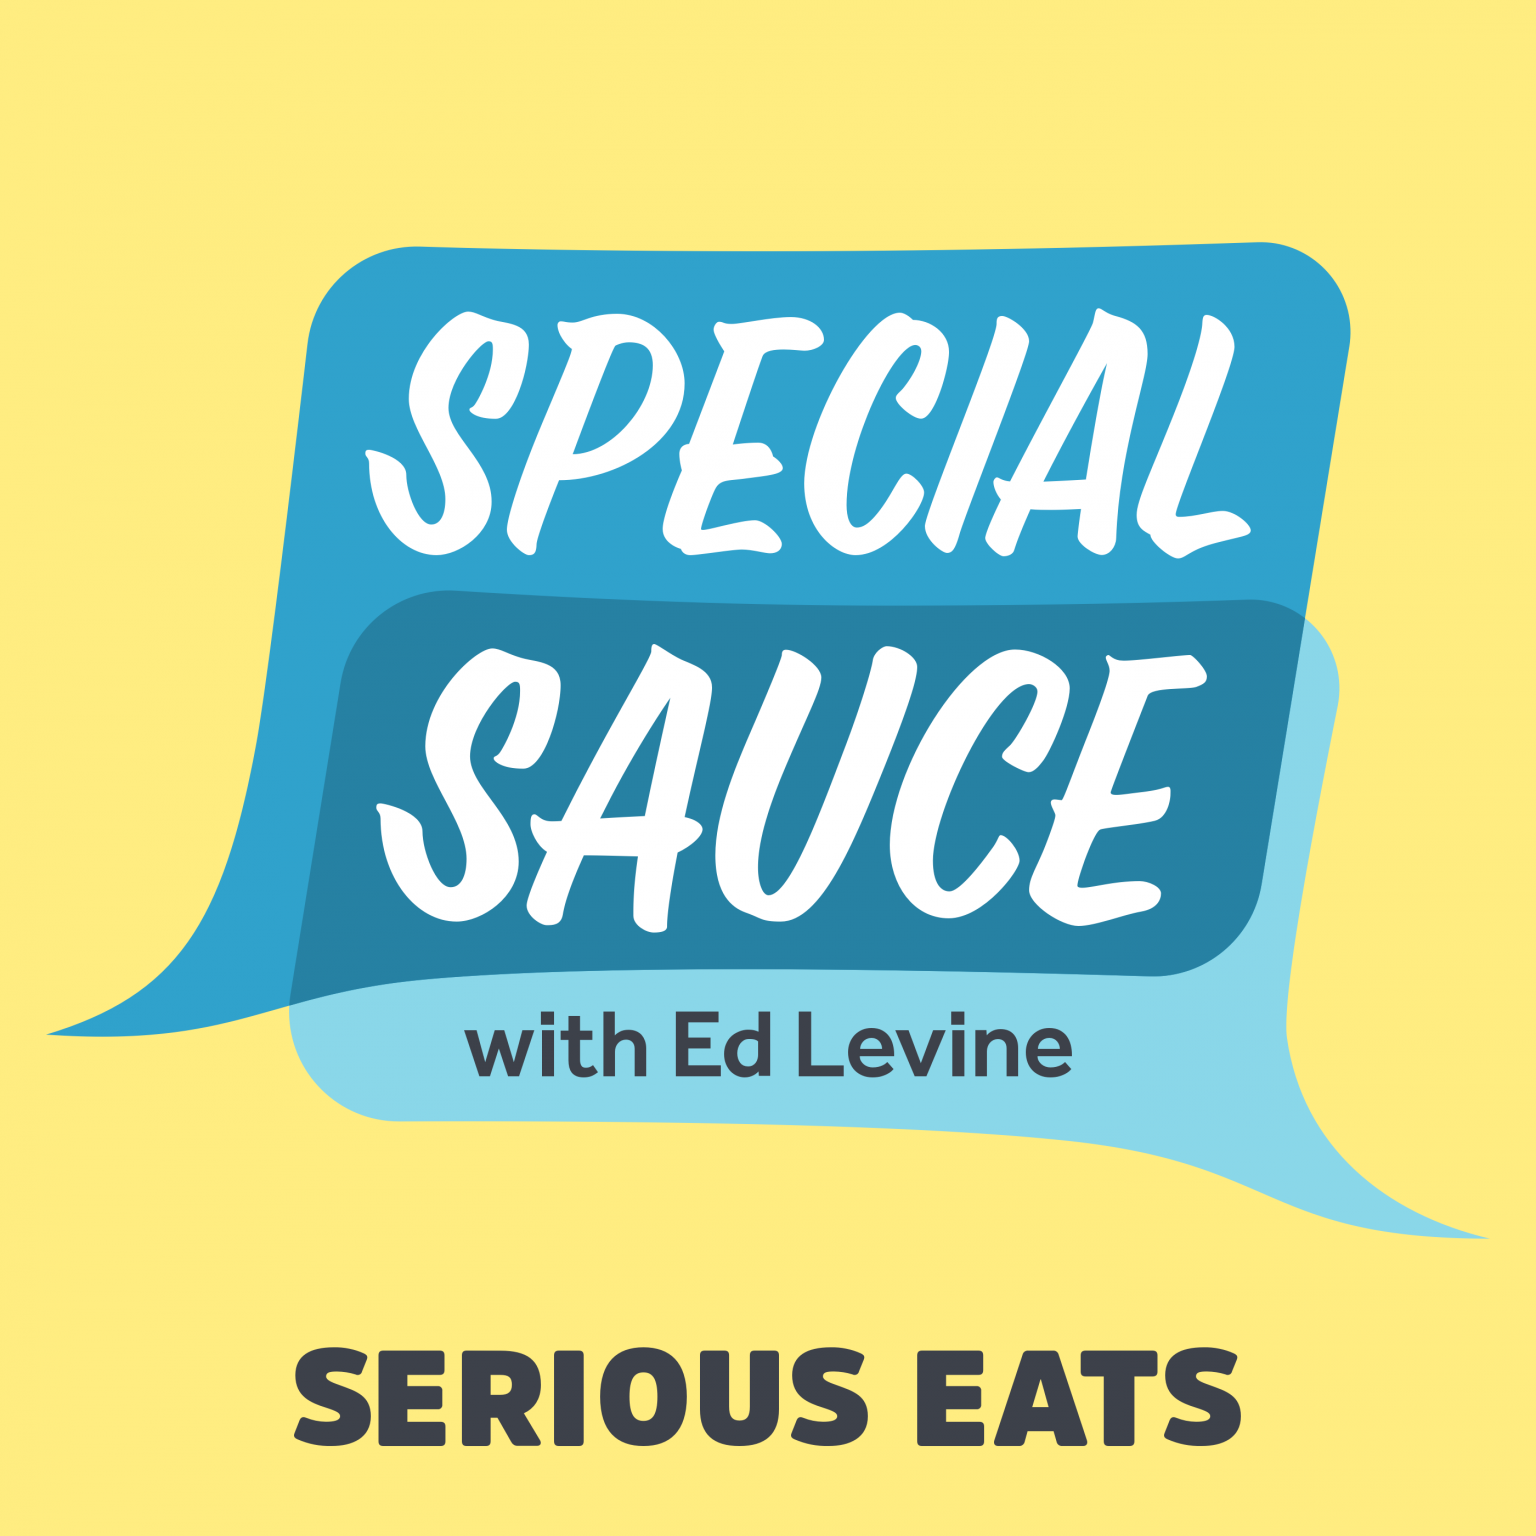 Special Sauce Live, Ed Levine Edition: A Serious Eater Is Born! [1/2]